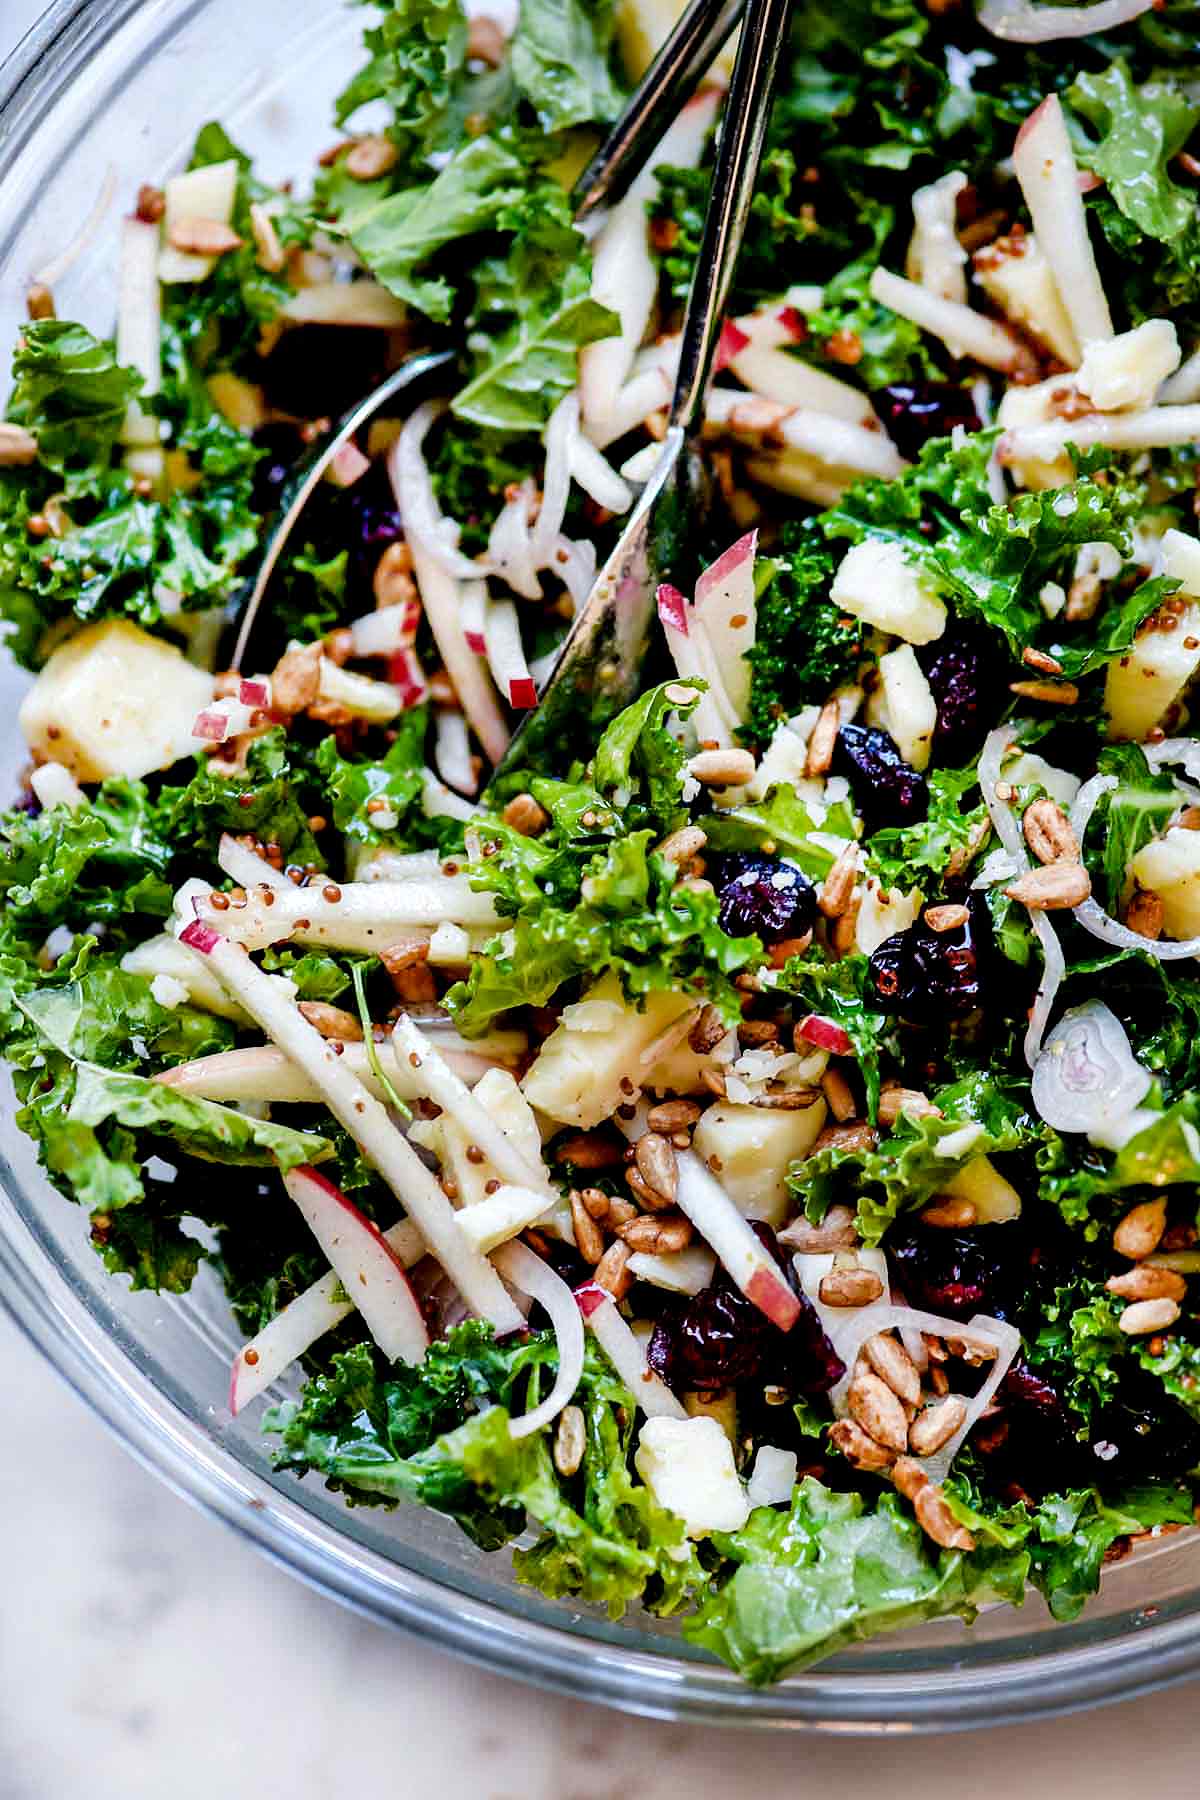 Kale Salad with Cranberries, Apple, and Cheddar Cheese Image